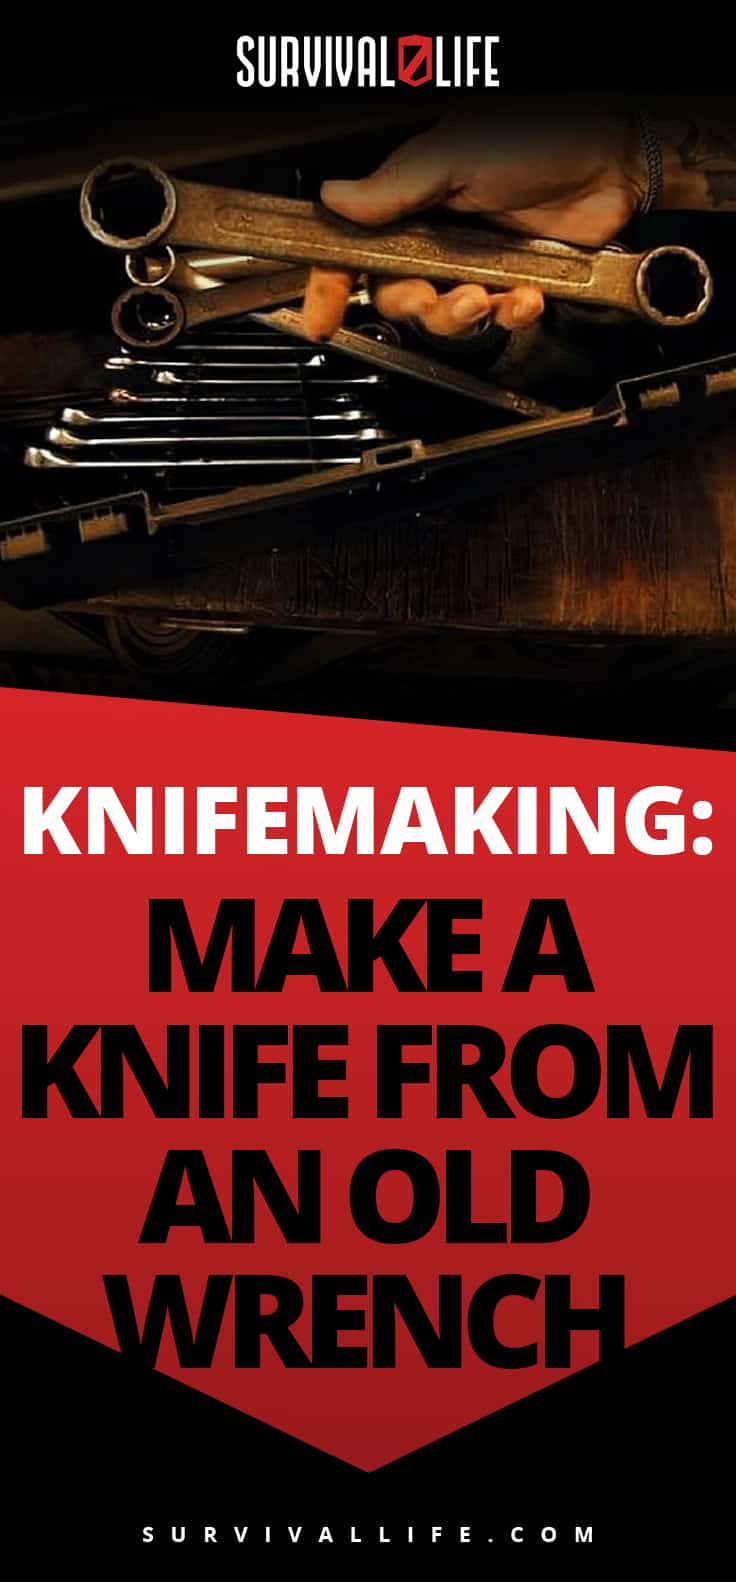 Placard | Old Wrench Knife | Knifemaking: Make A Knife From An Old Wrench